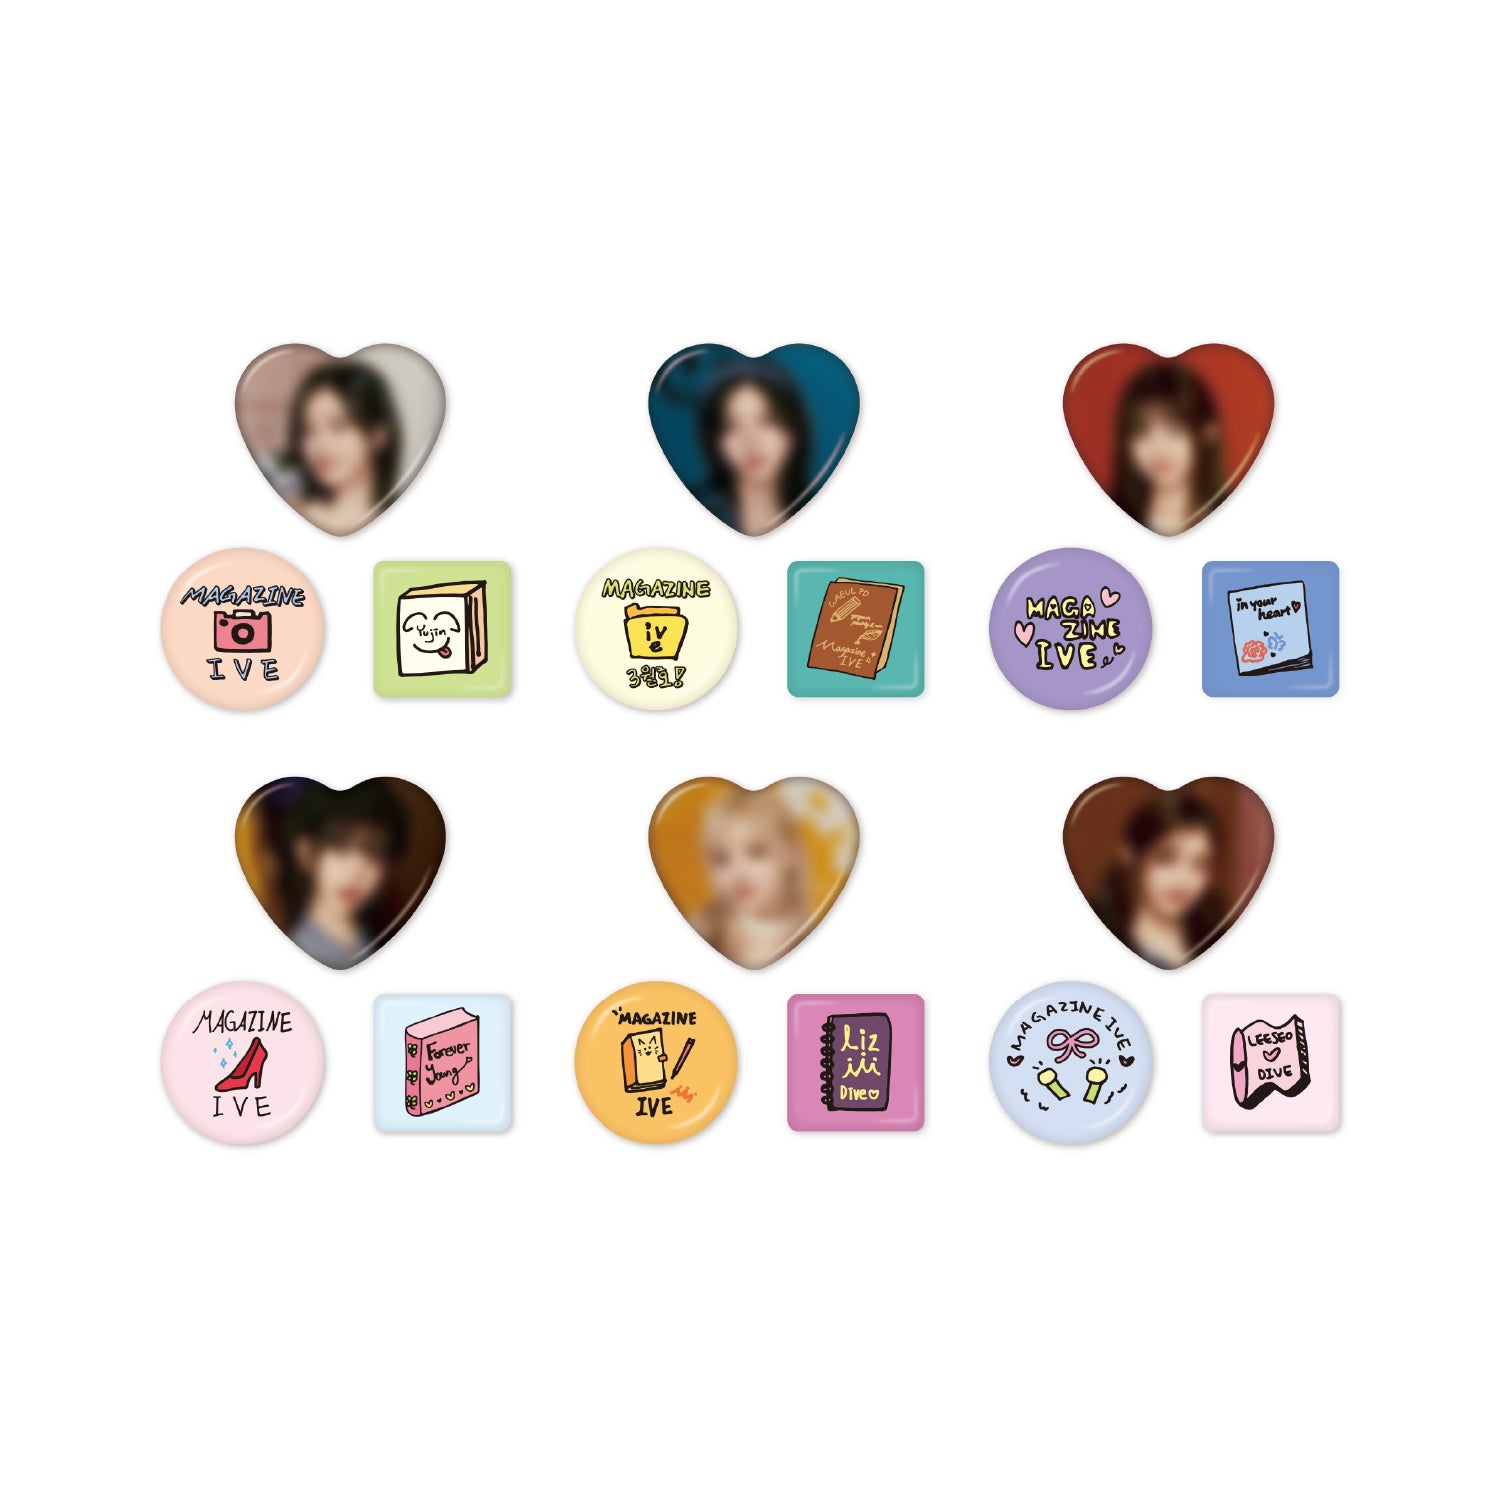 IVE - MAGAZINE IVE 2024 IVE 2ND FANMEETING OFFICIAL MD RANDOM PIN BUTTON SET